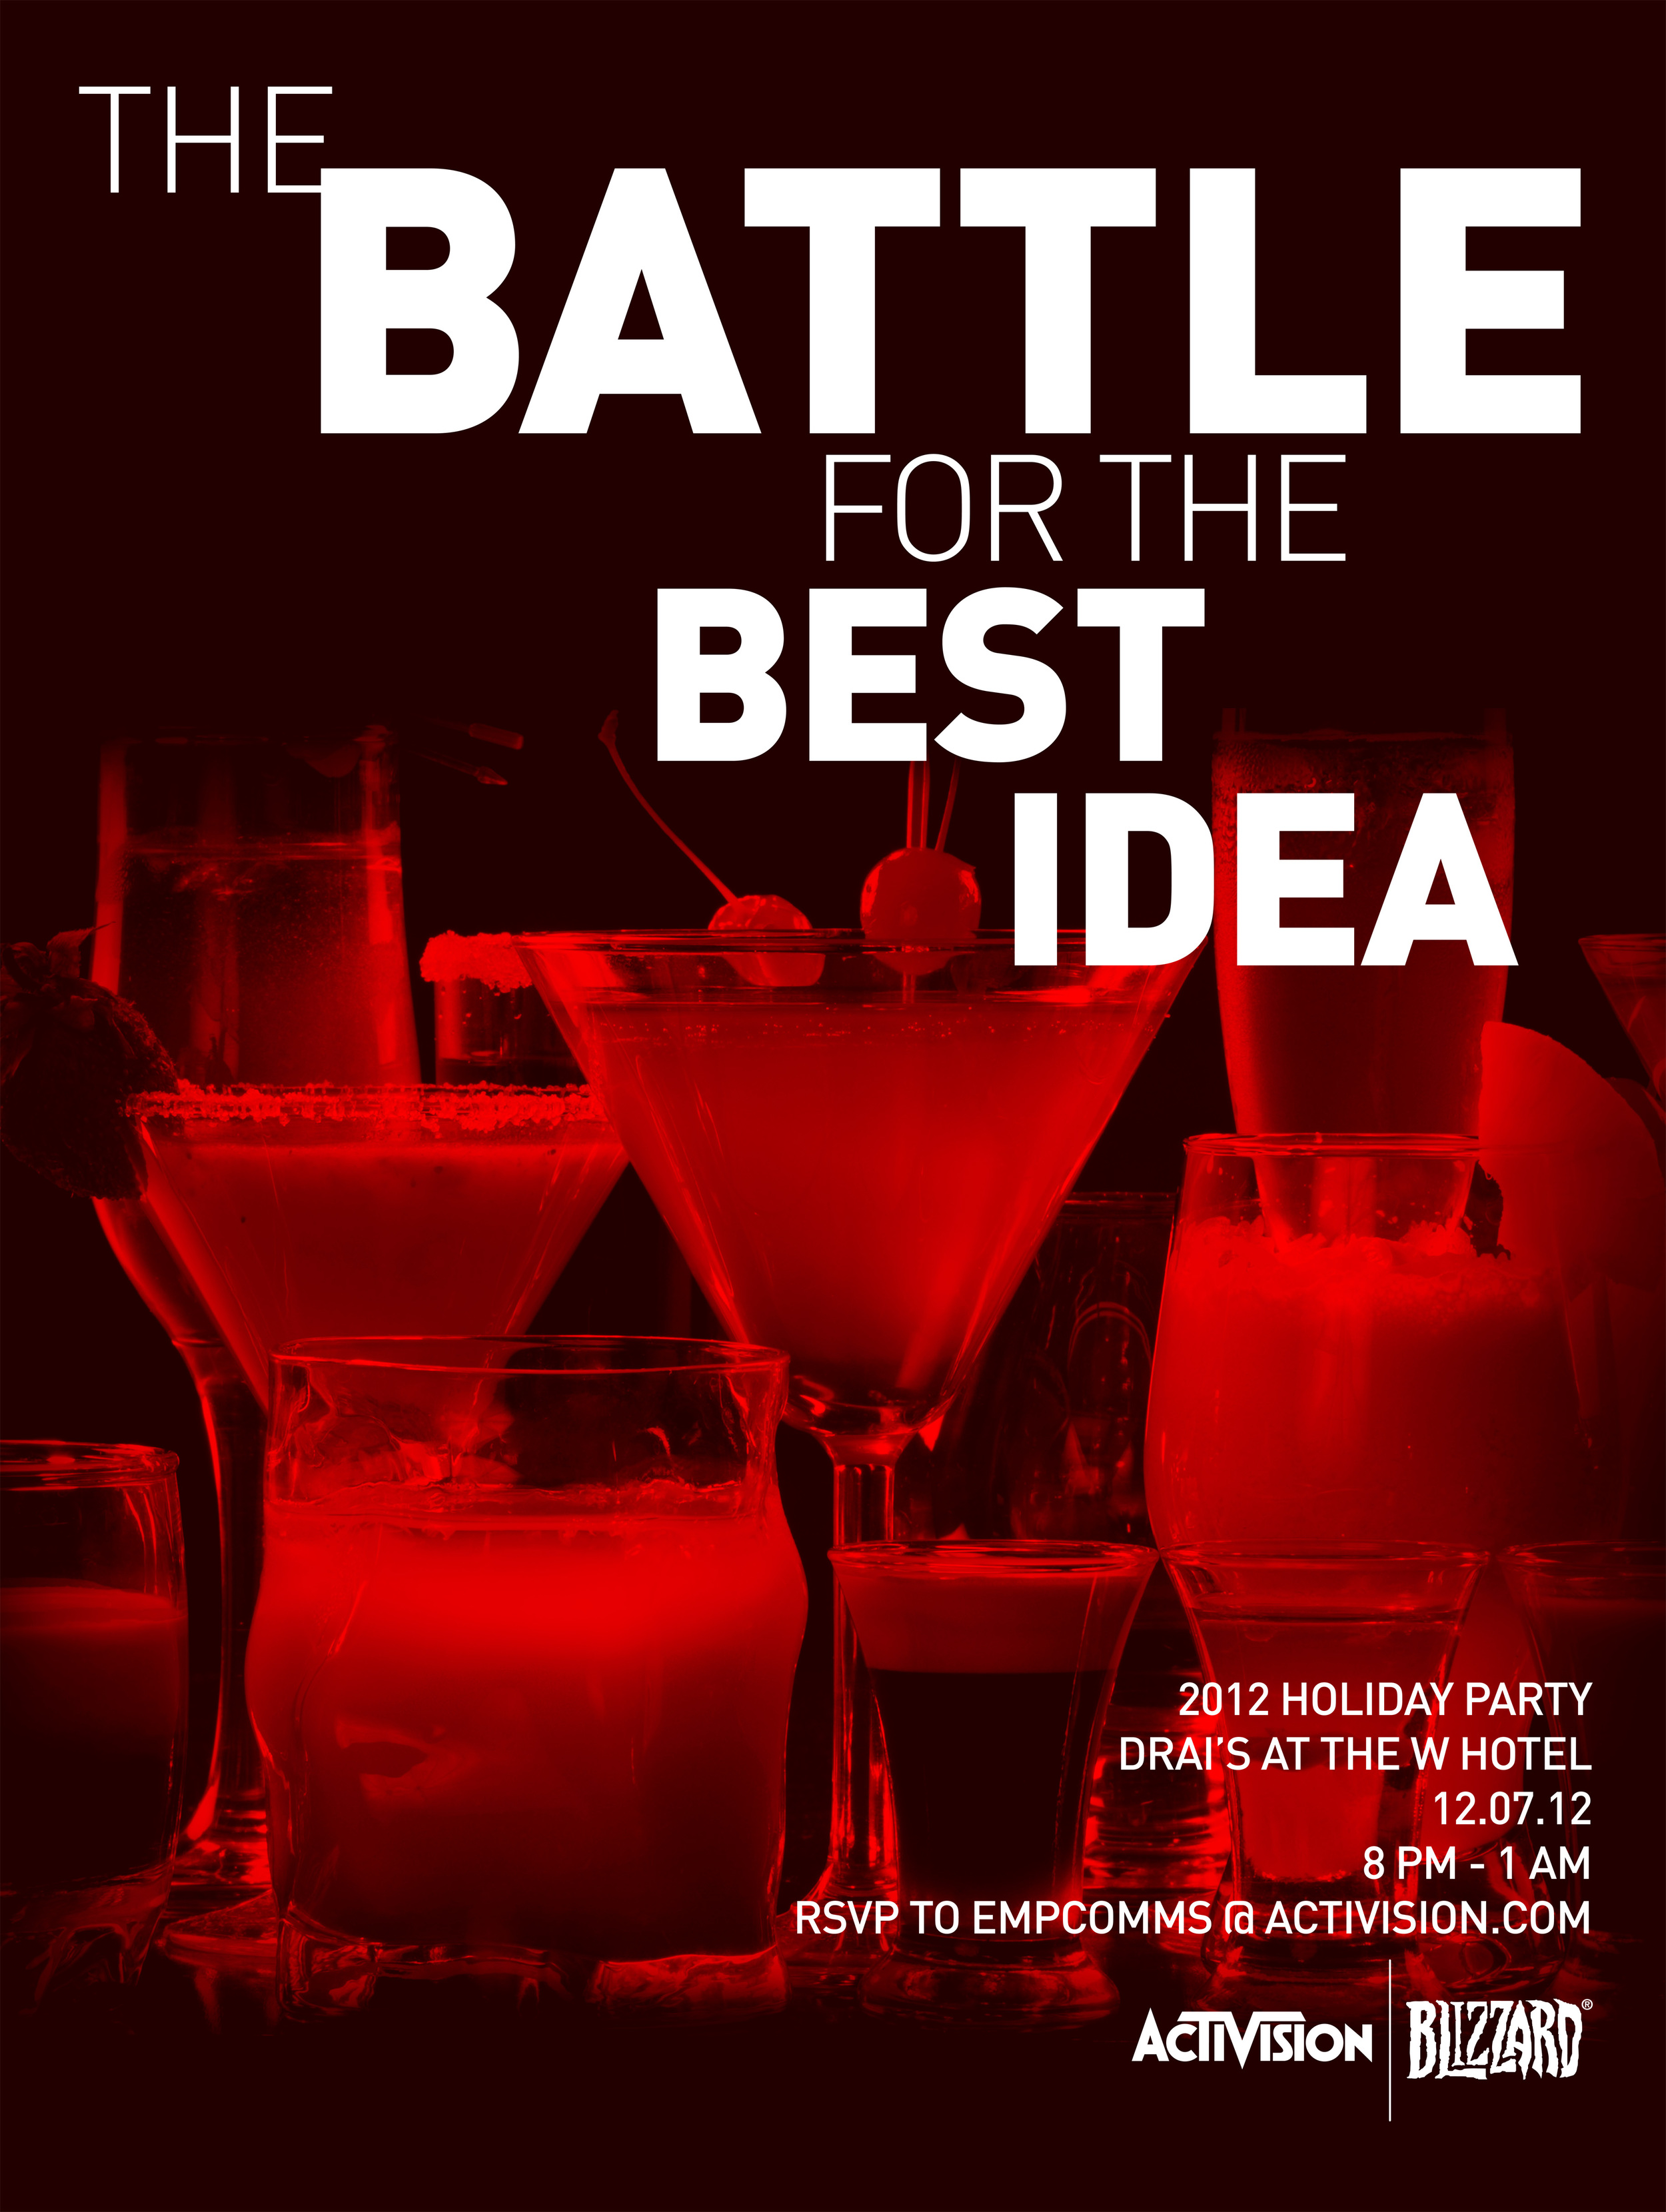 "The Battle for the Best Idea" Activision | Blizzard Holiday Party Signage